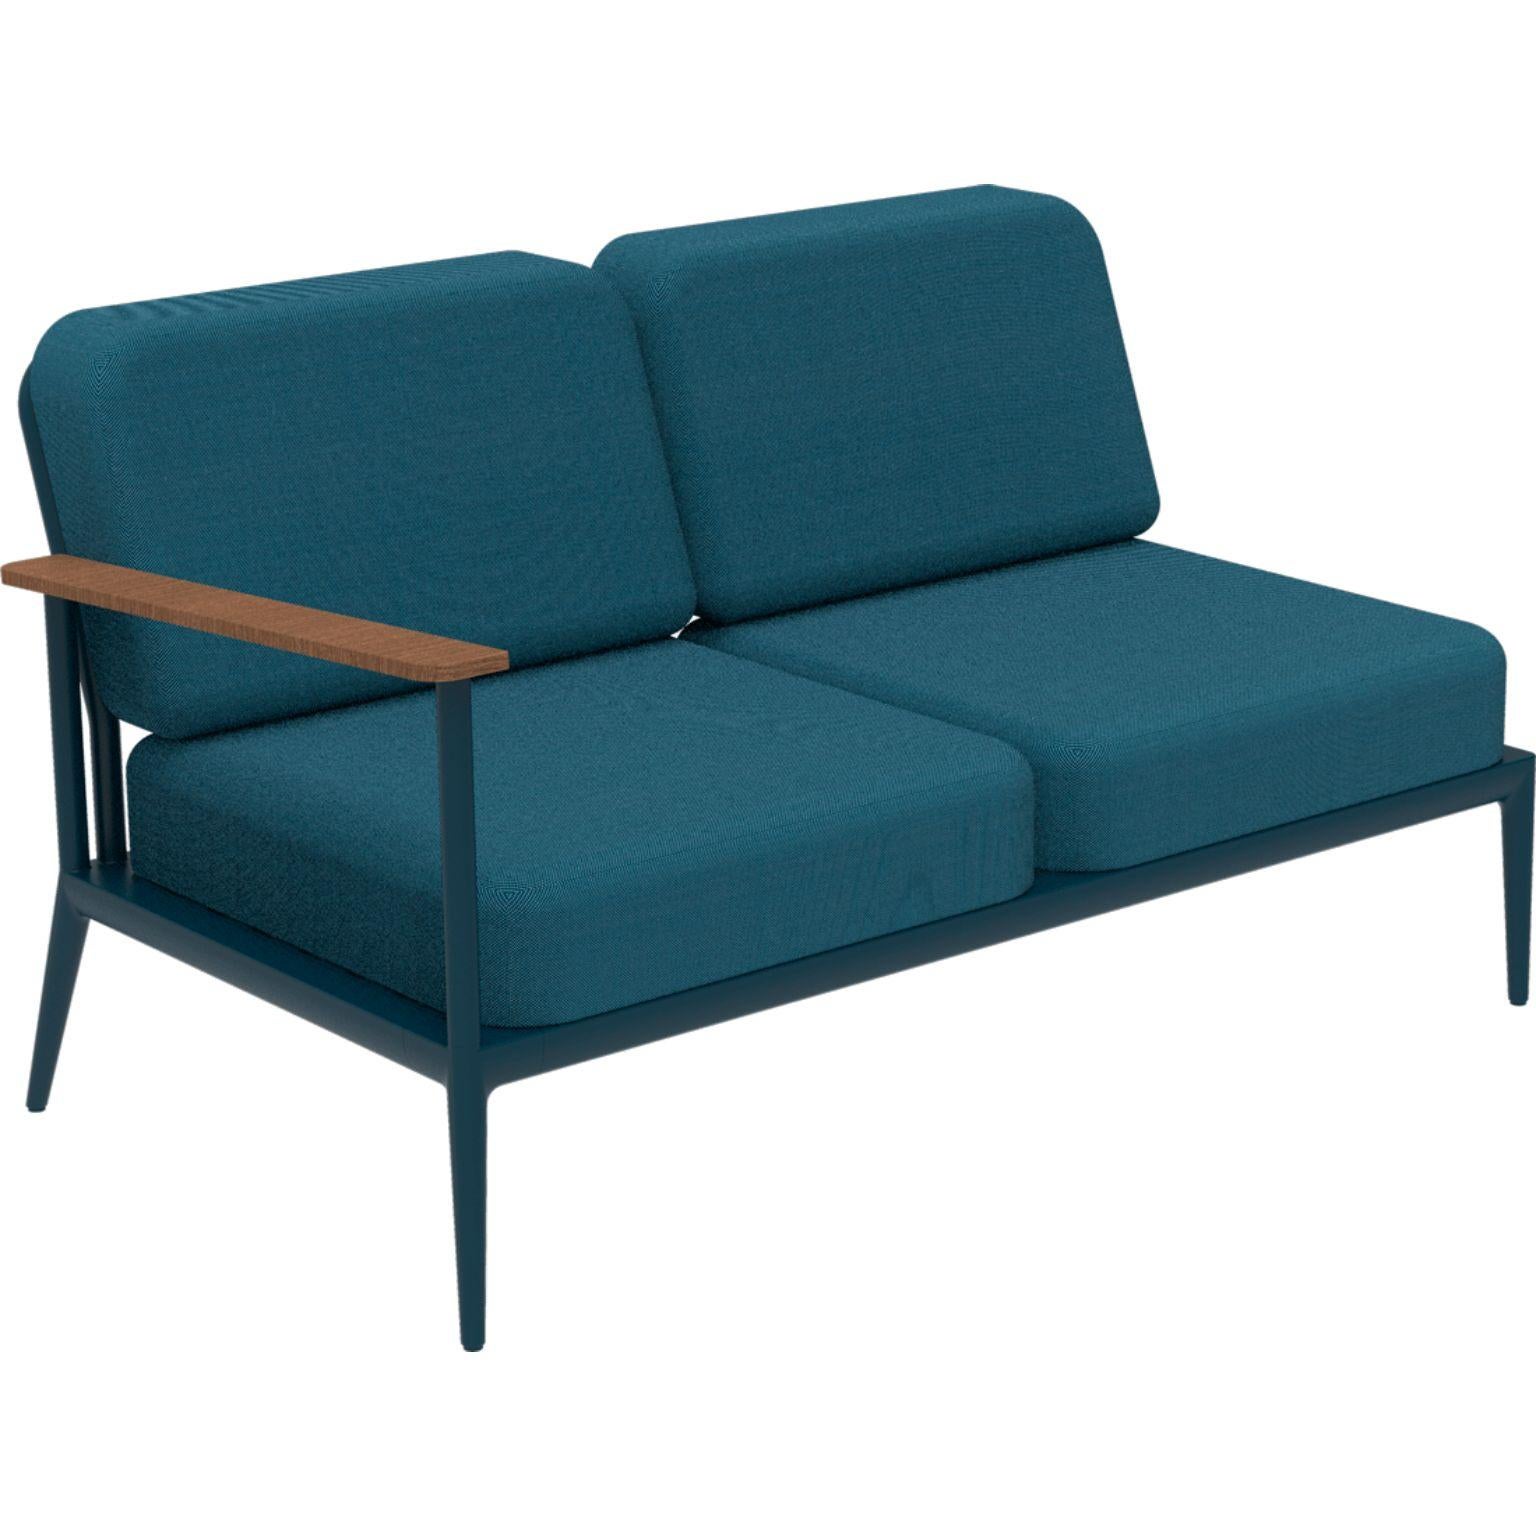 Nature Navy Double Right modular sofa by MOWEE
Dimensions: D85 x W144 x H81 cm (seat height 42 cm).
Material: Aluminum, upholstery and Iroko Wood.
Weight: 29 kg.
Also available in different colors and finishes. 

An unmistakable collection for